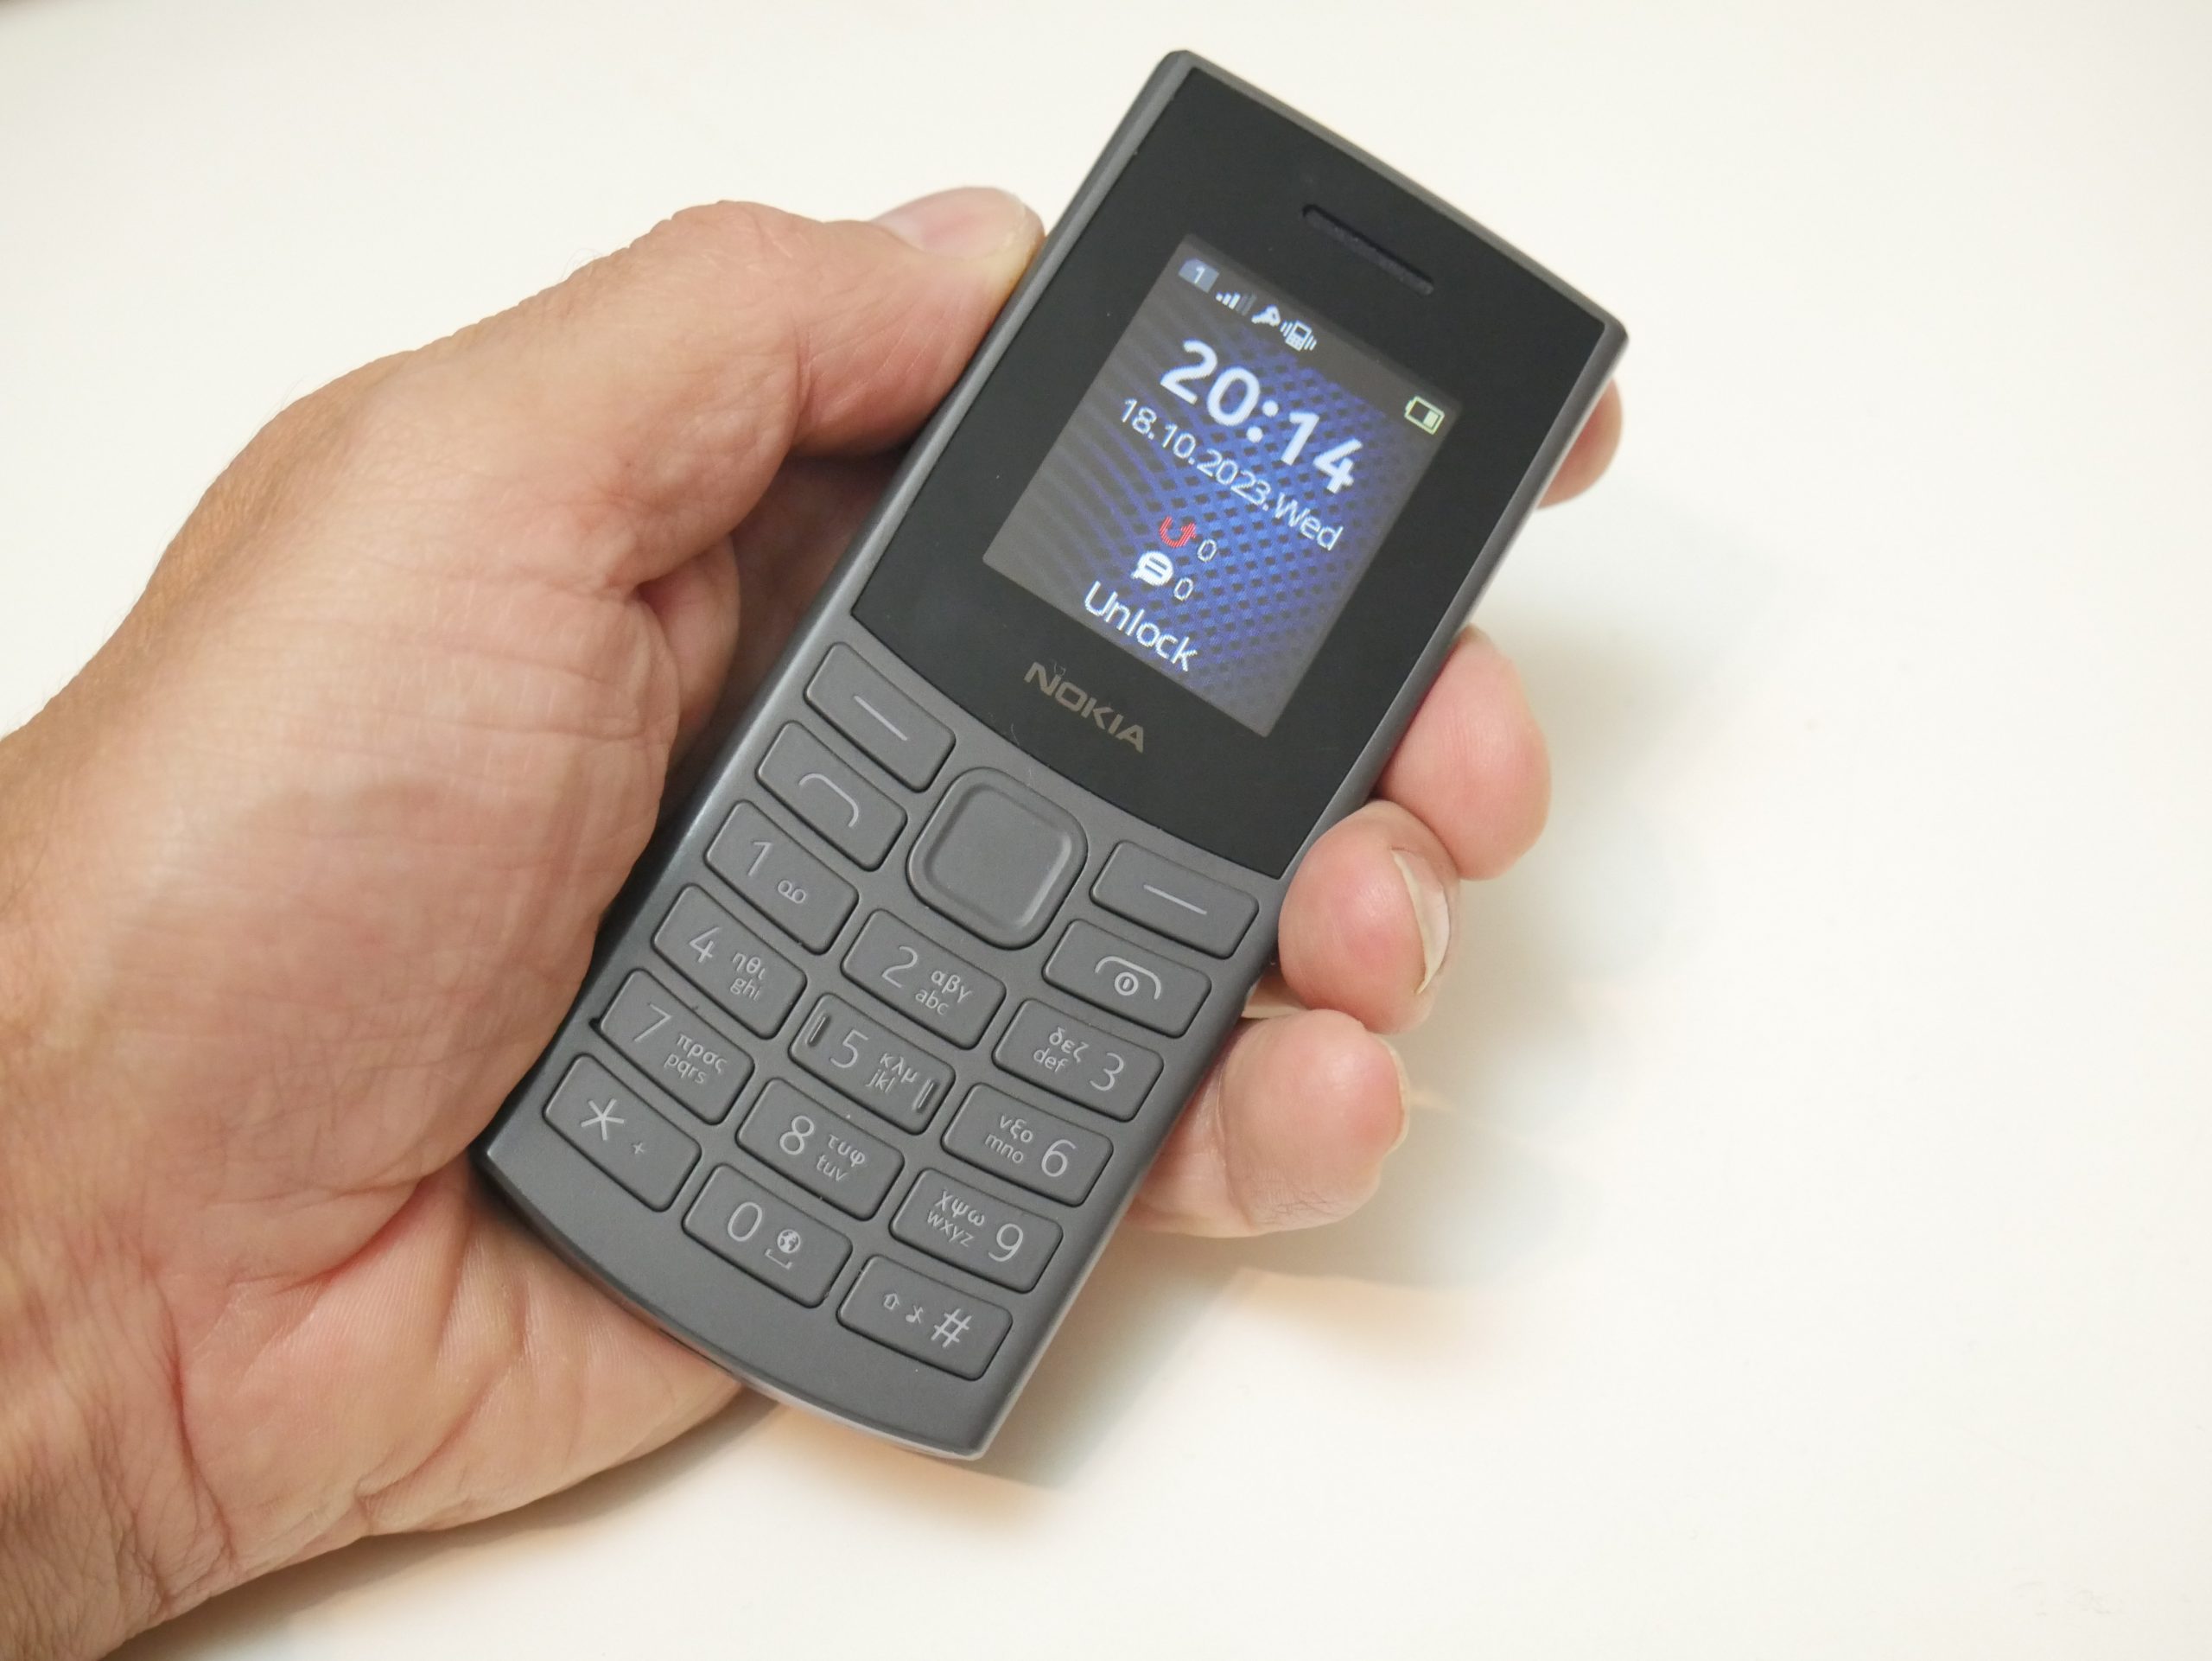 Hands on: Nokia 105 review